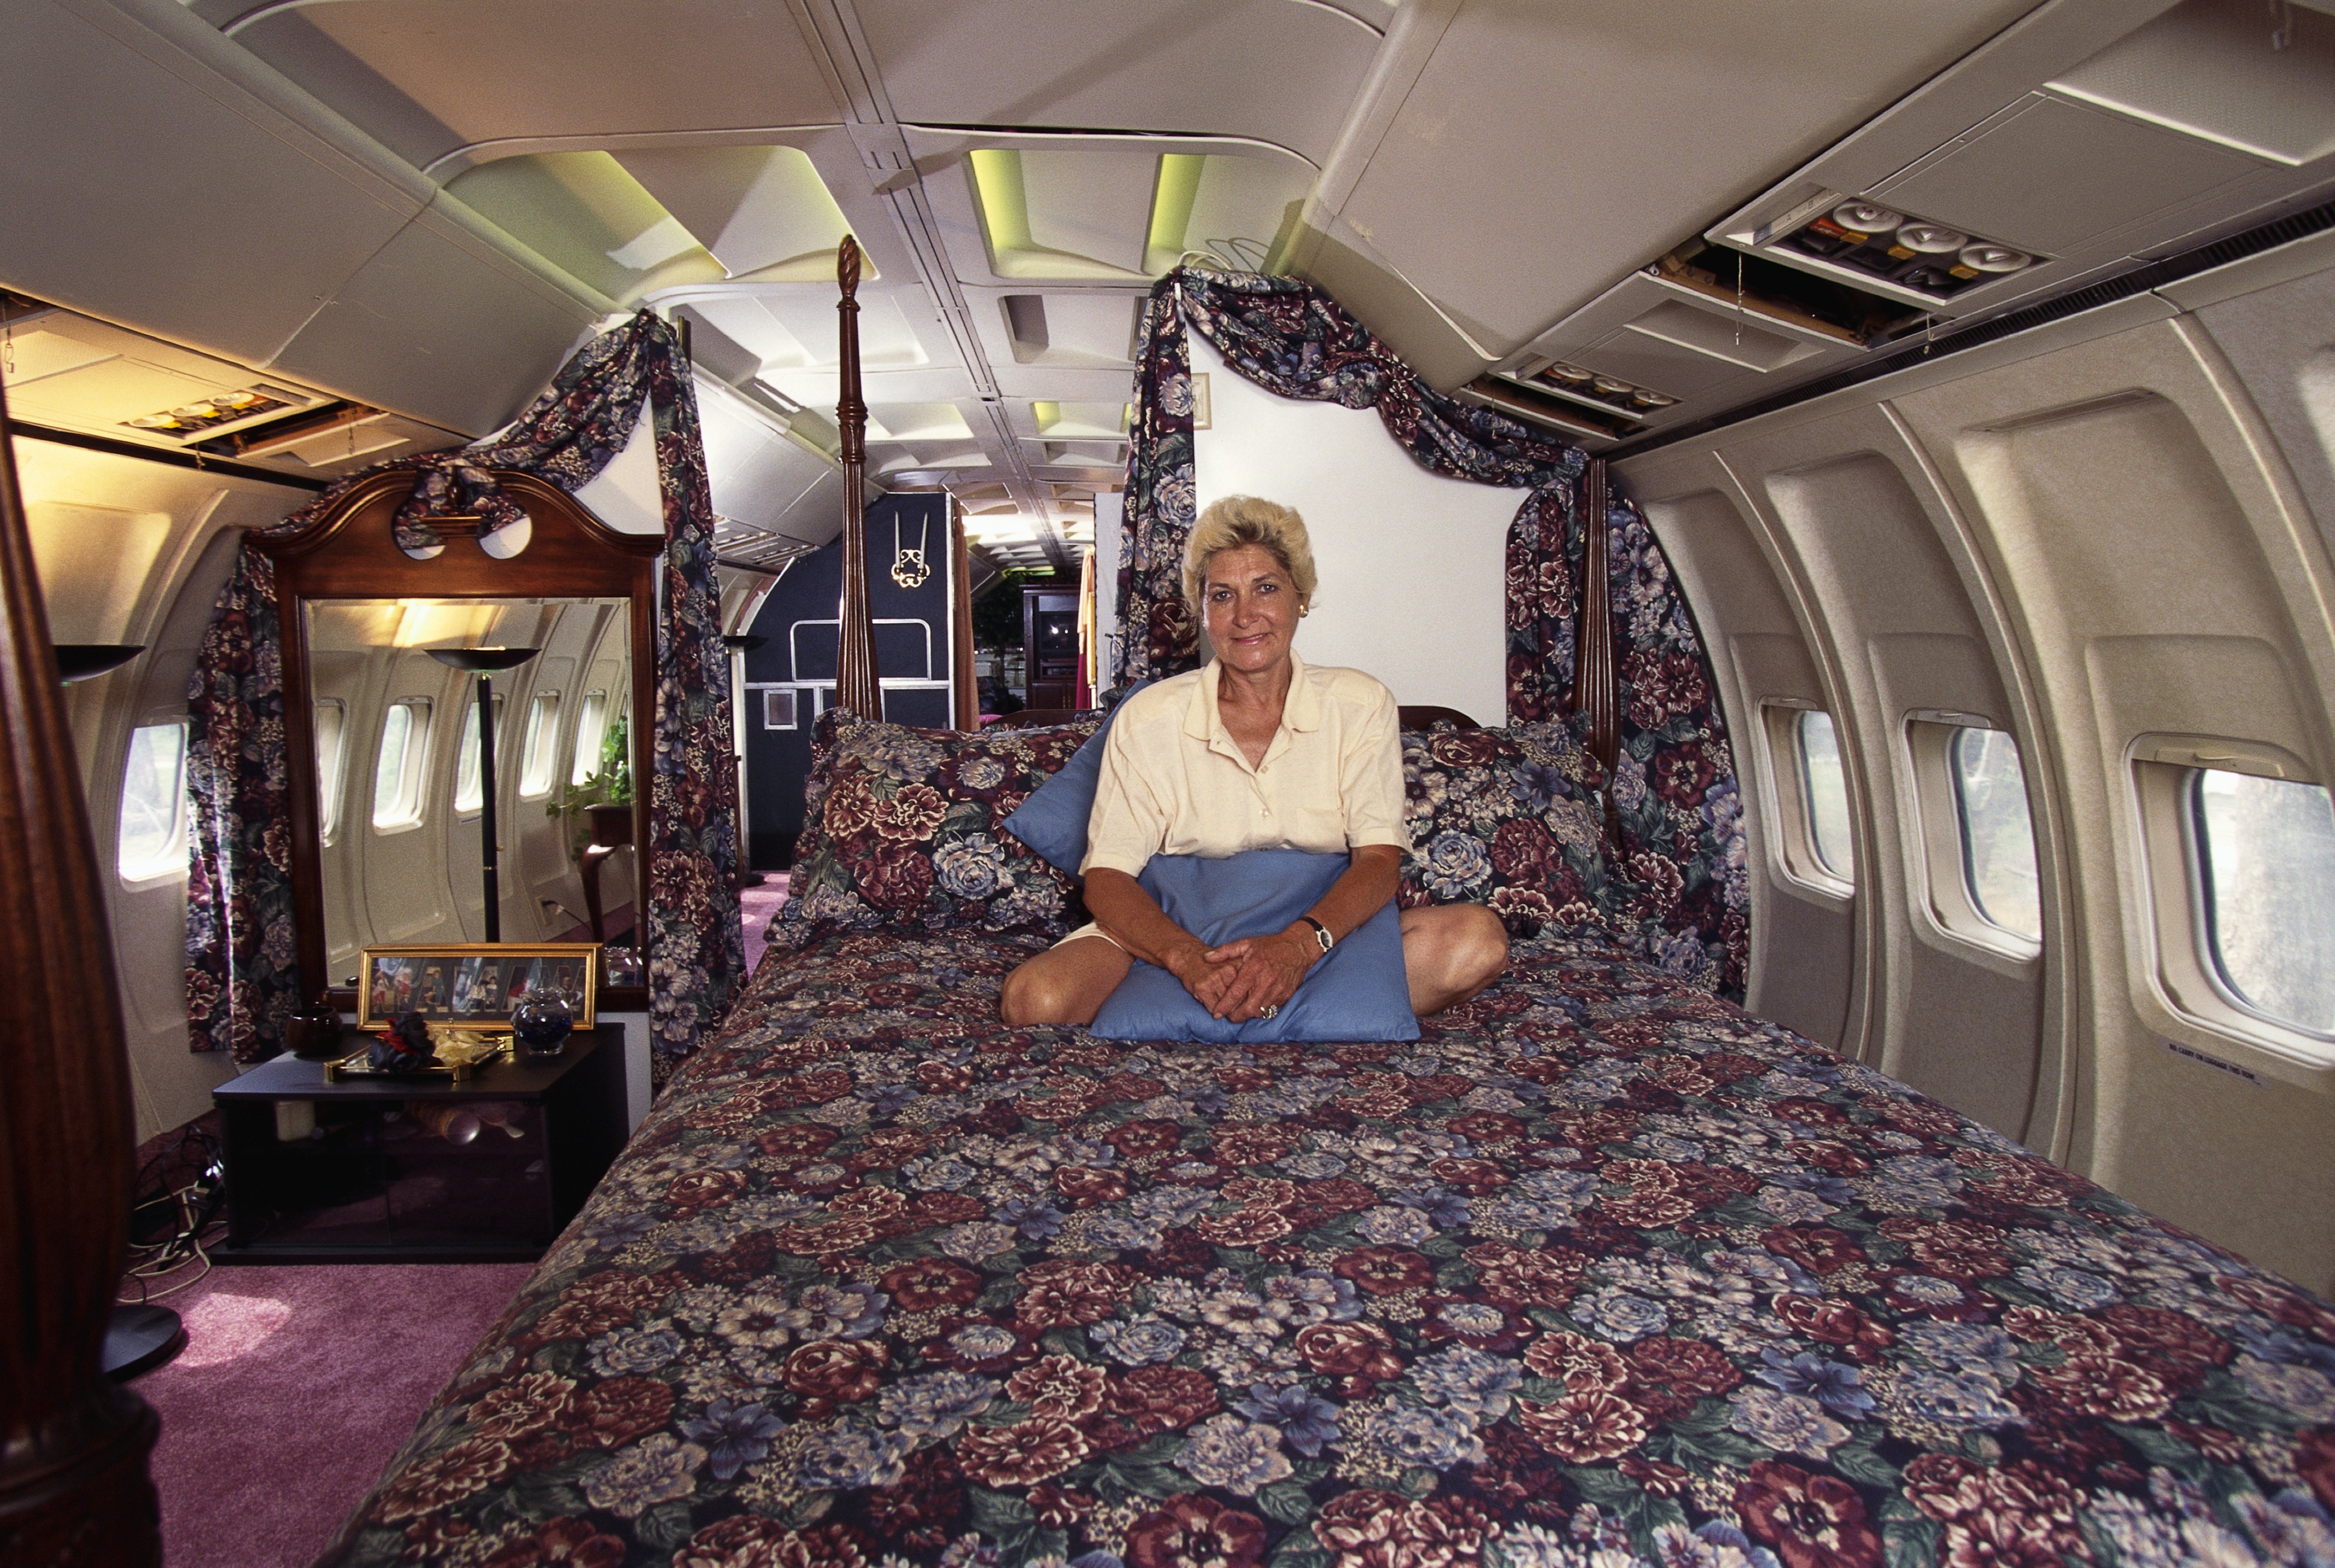 Jo Ann Ussery sits on her bed inside her converted Boeing 727. | Source: Getty Images